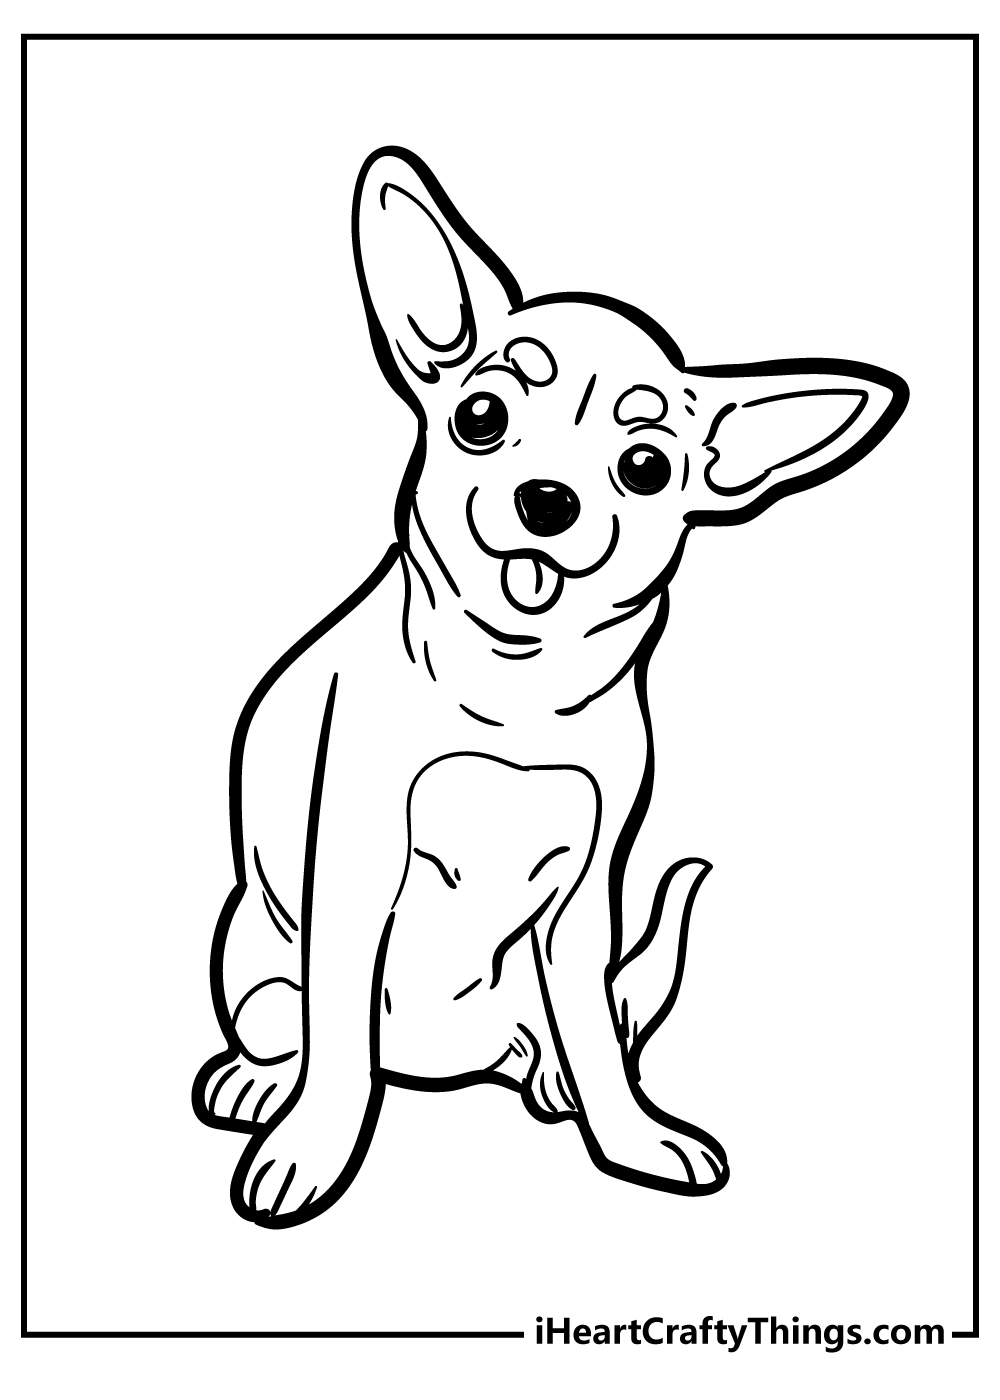 Chihuahua Coloring Pages for kids free download